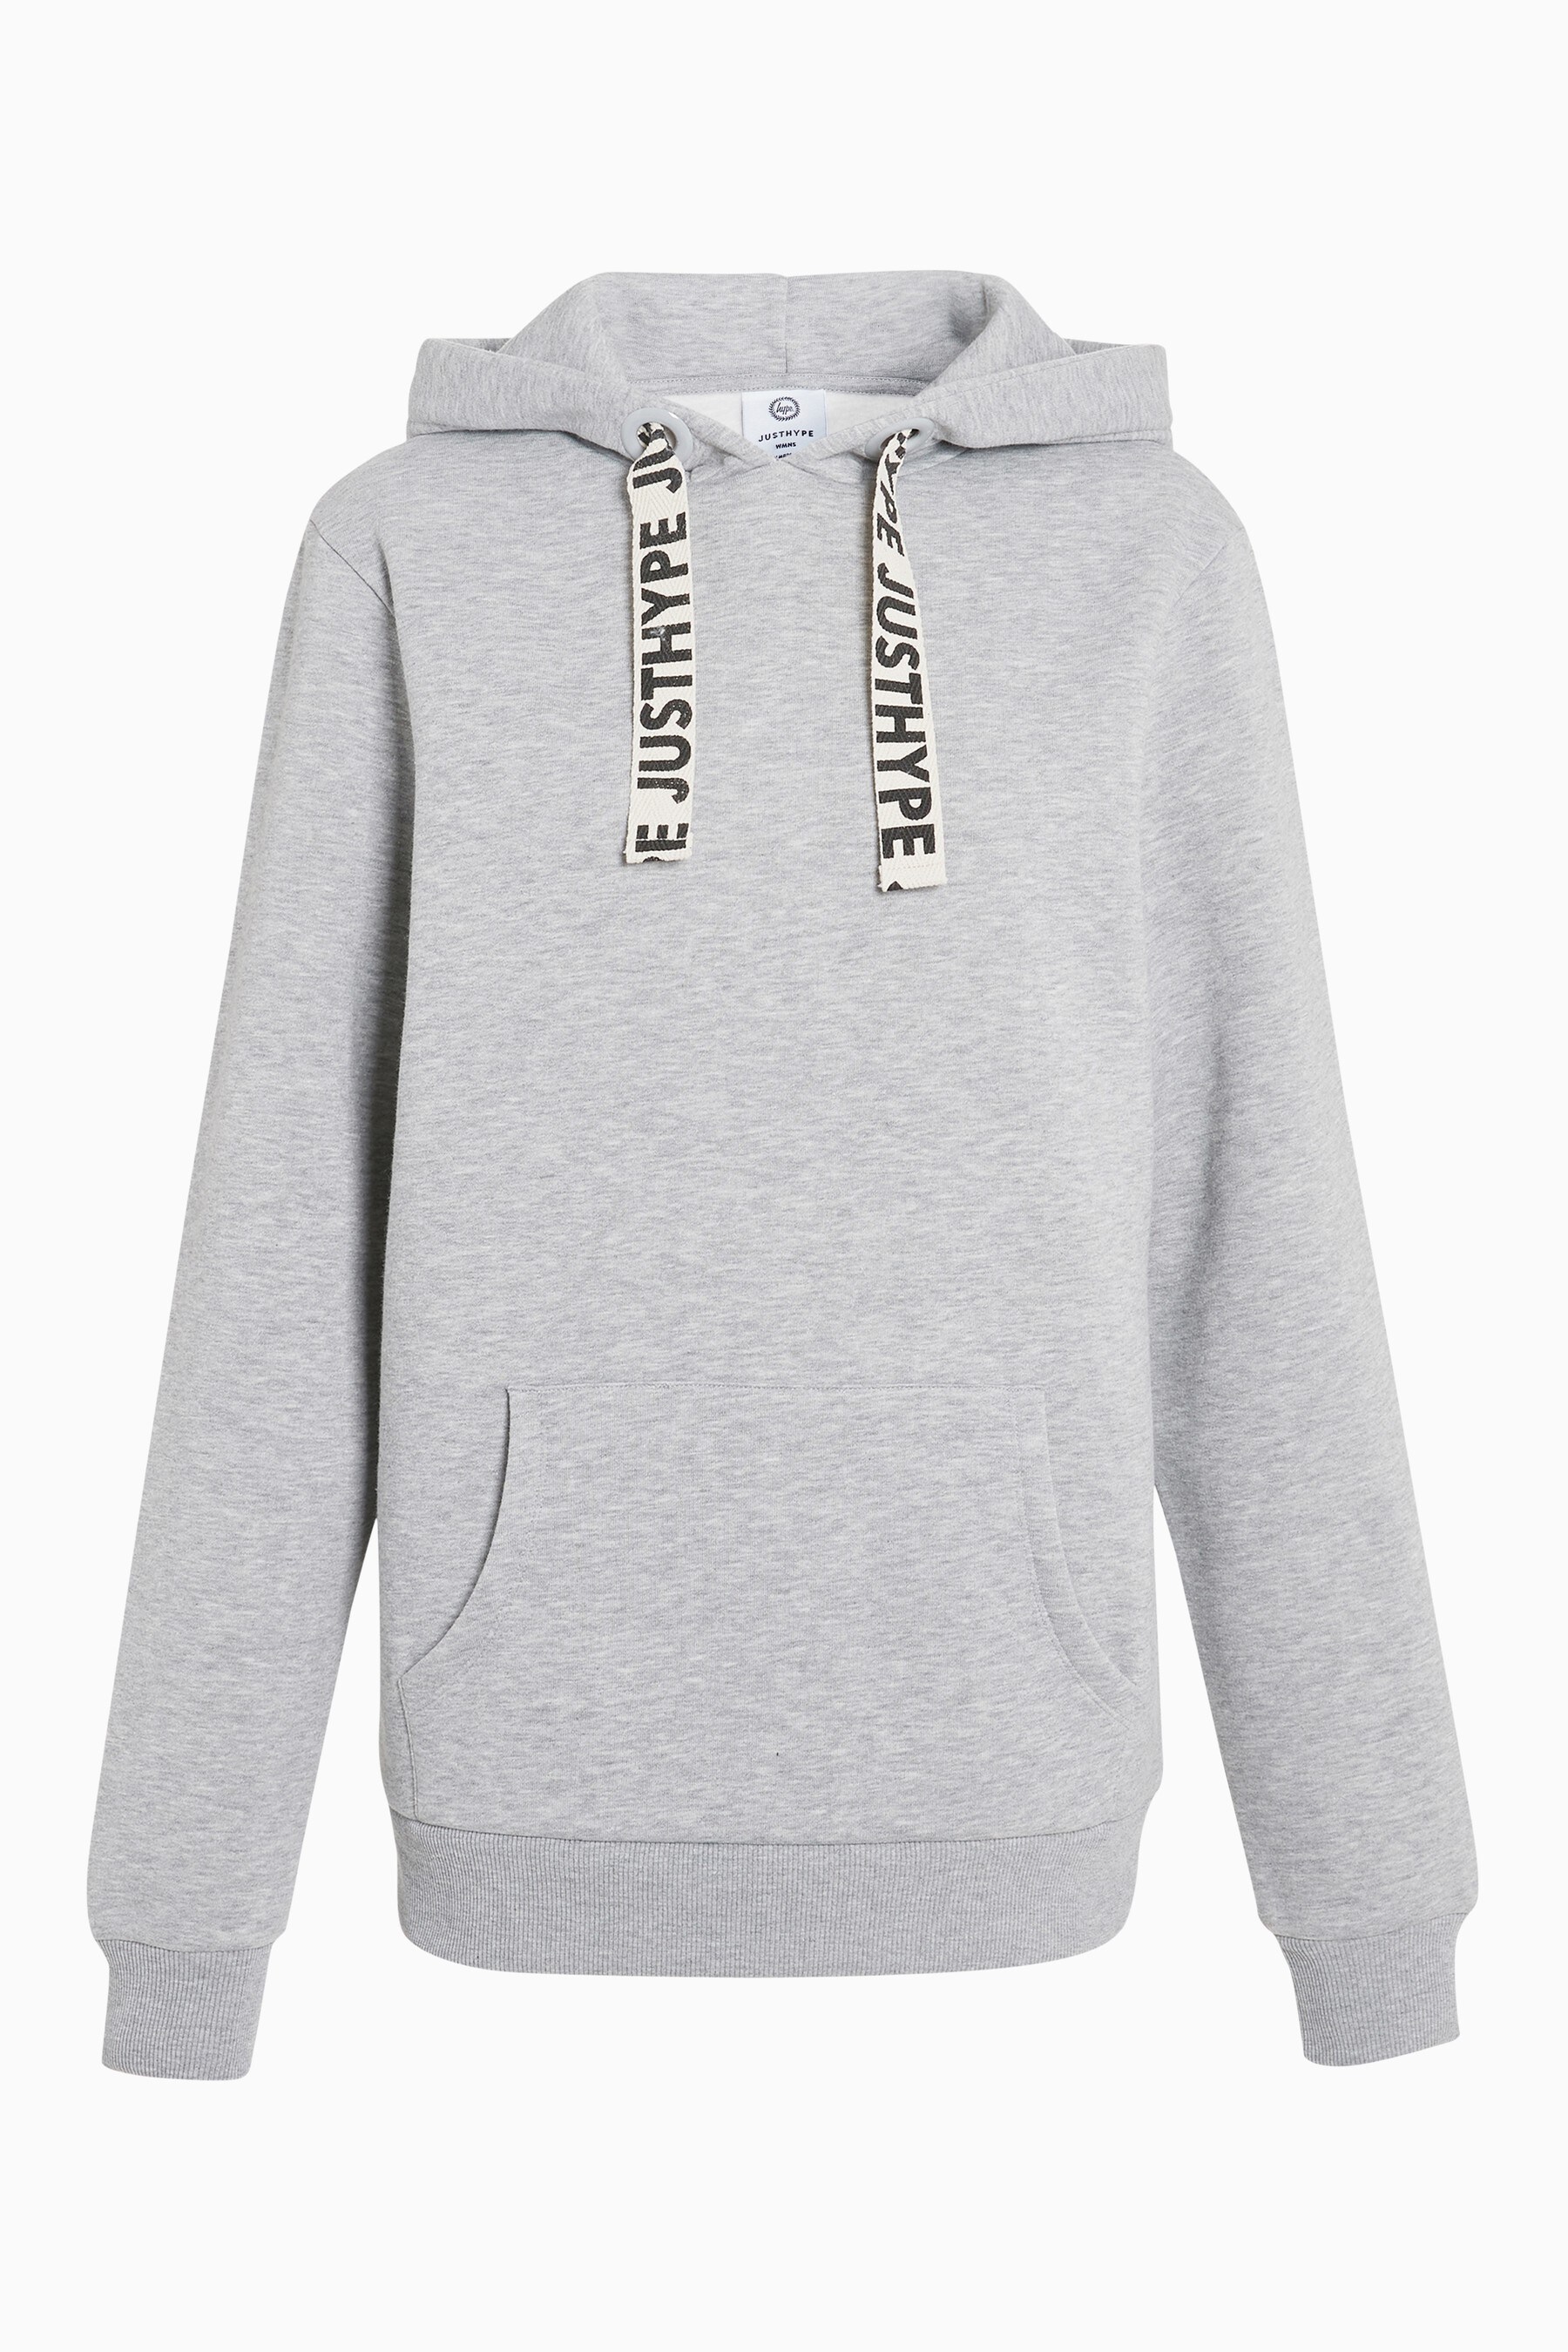 Buy Hype. Hoodie from the Next UK online shop